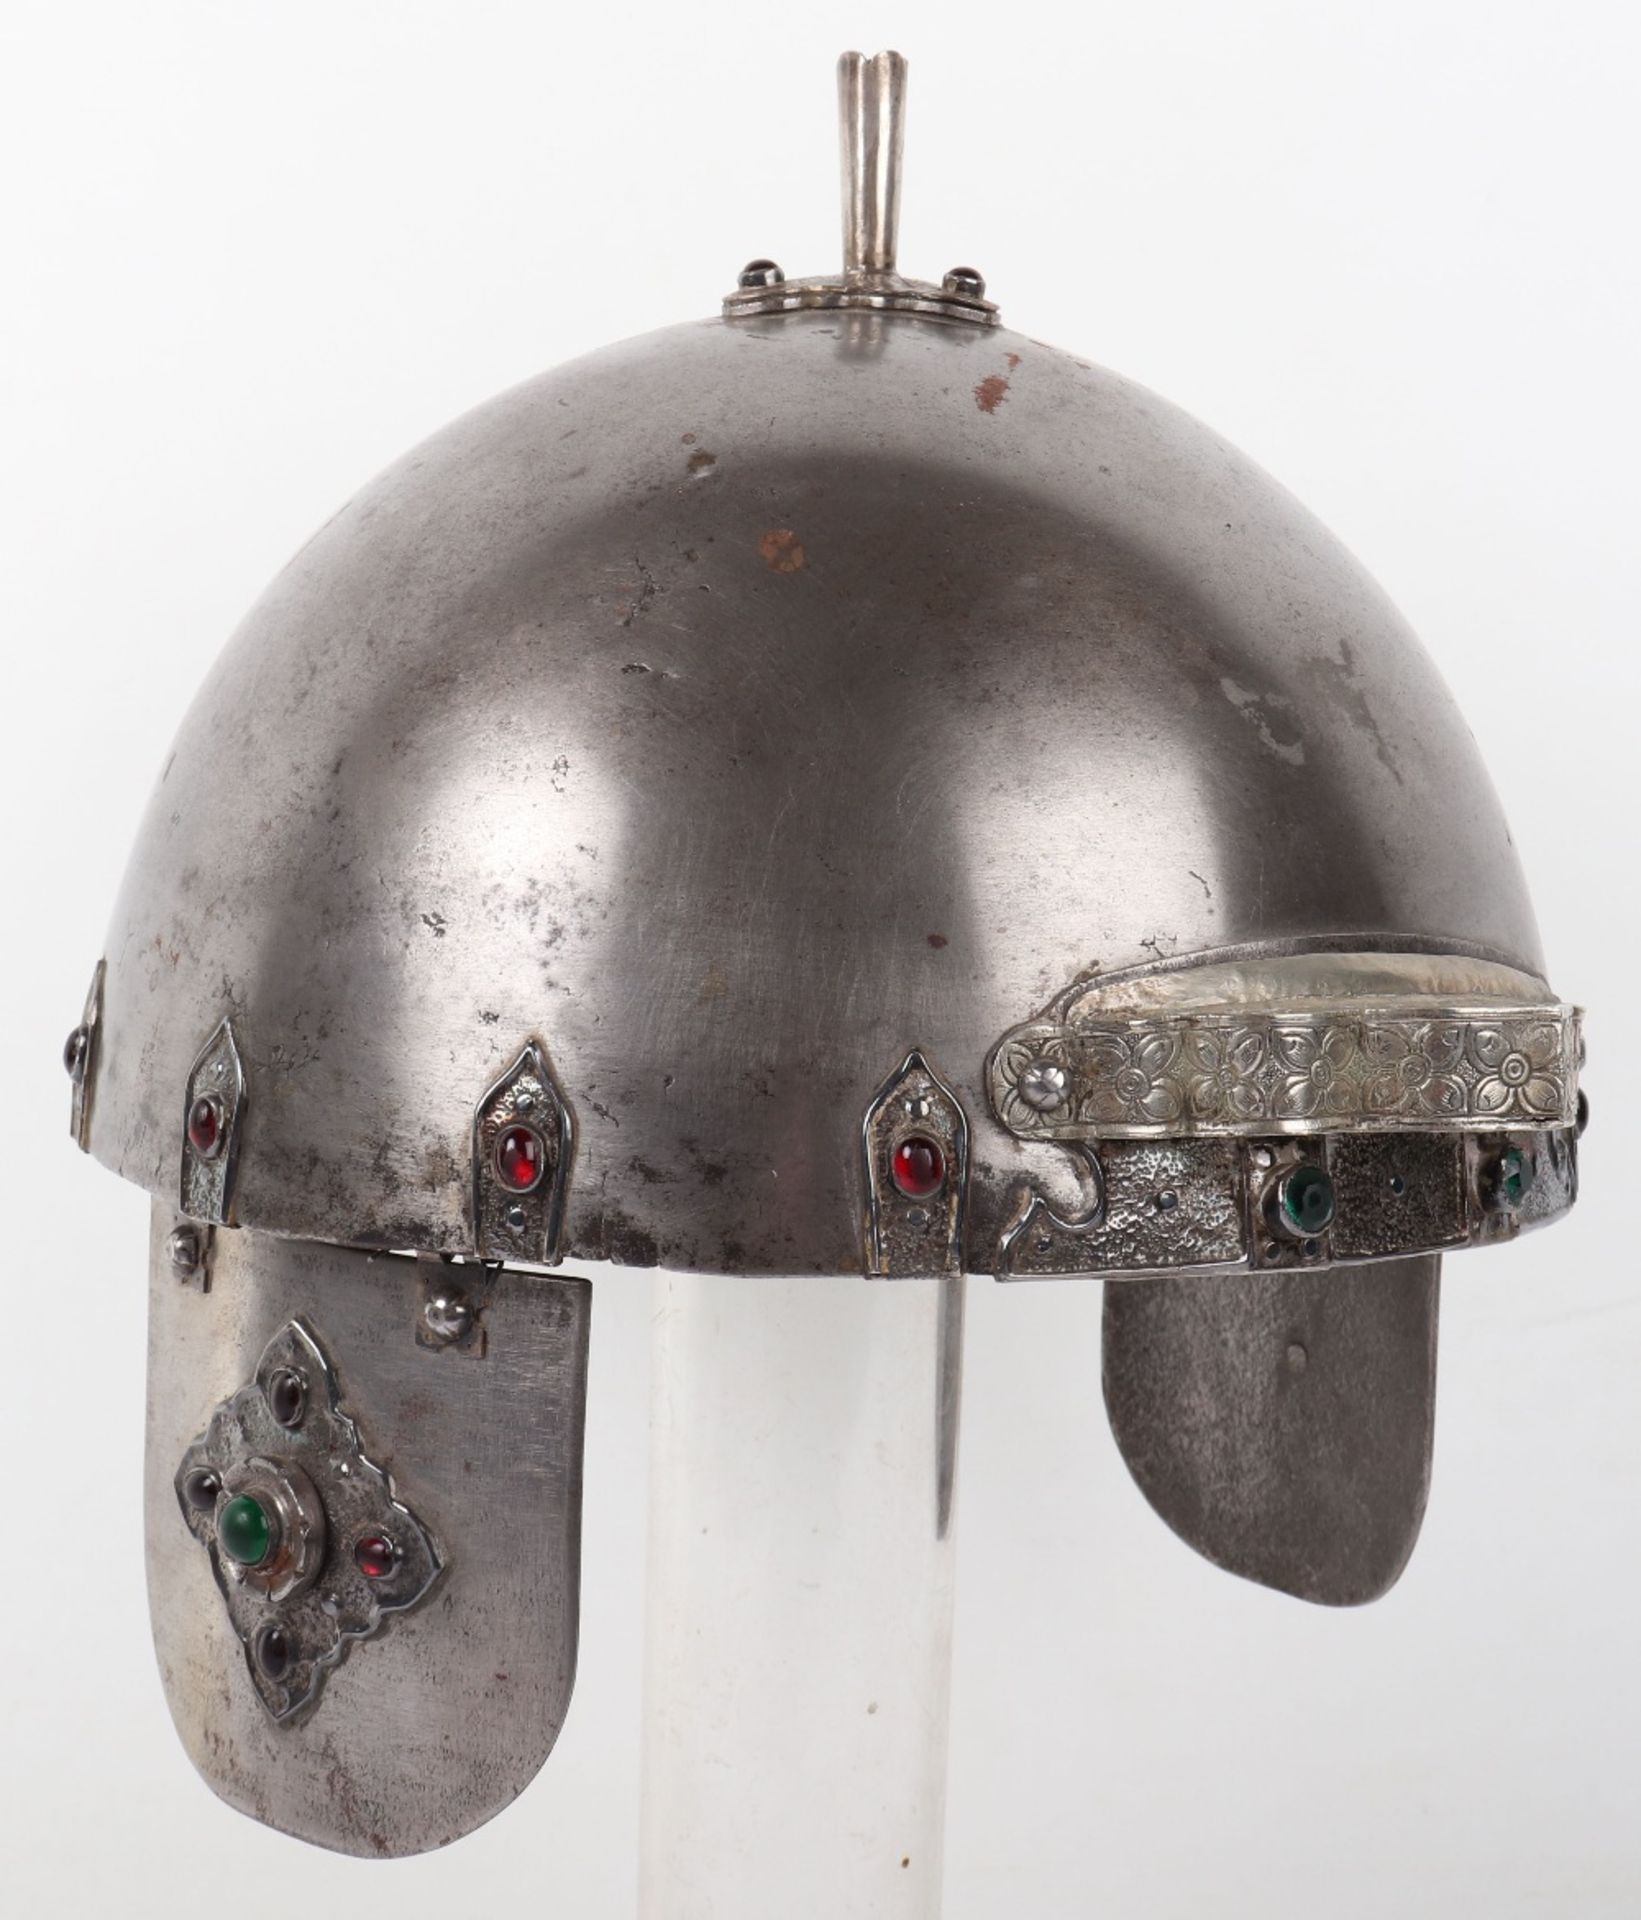 Bhutanese Helmet Possibly 18th or 19th Century - Image 2 of 15